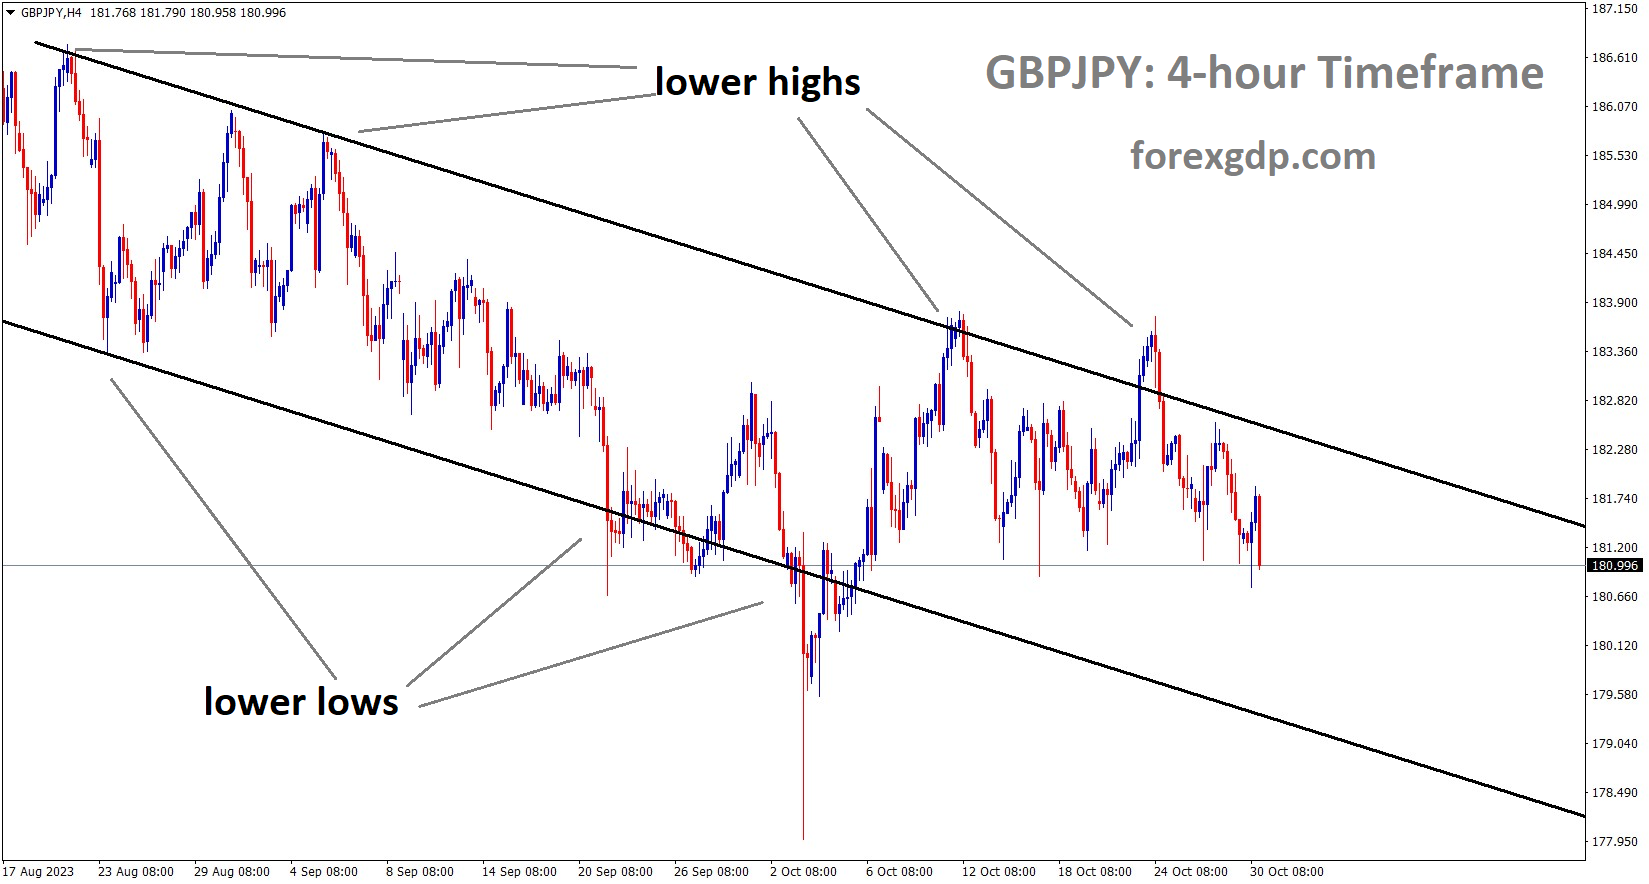 GBPJPY is moving in the Descending channel and the market has fallen from the lower high area of the channel